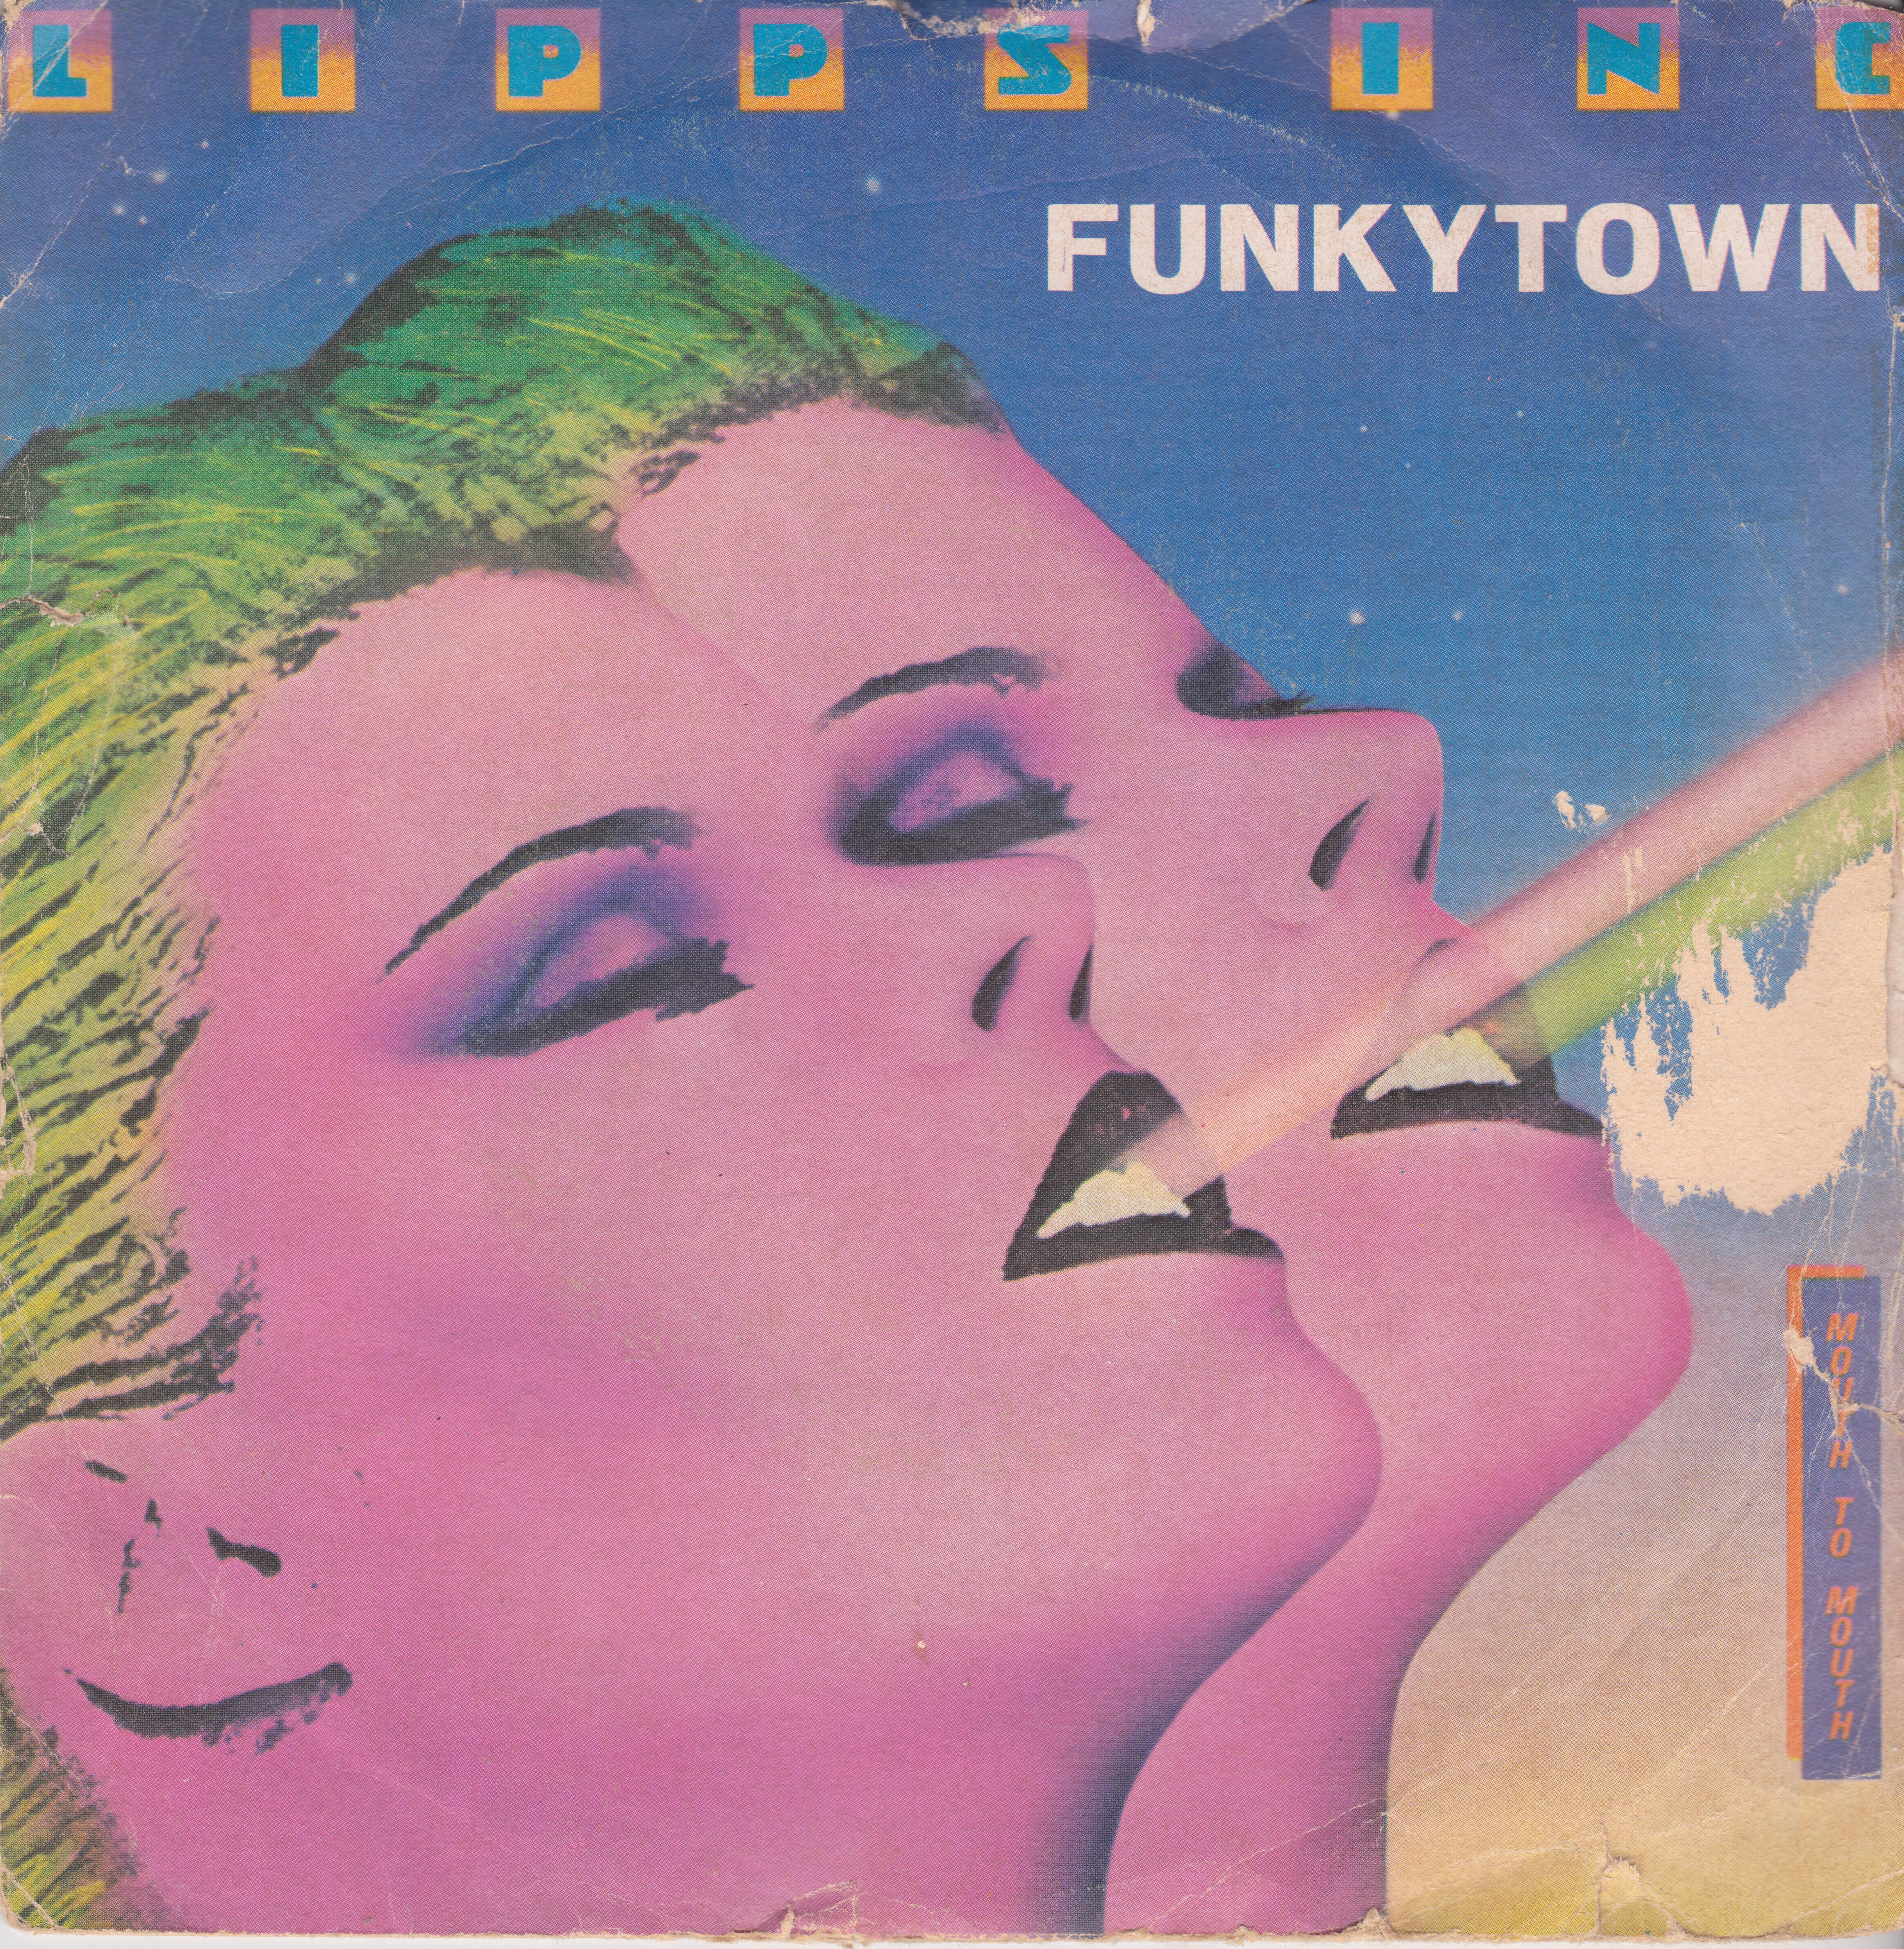 Funky town low quality download